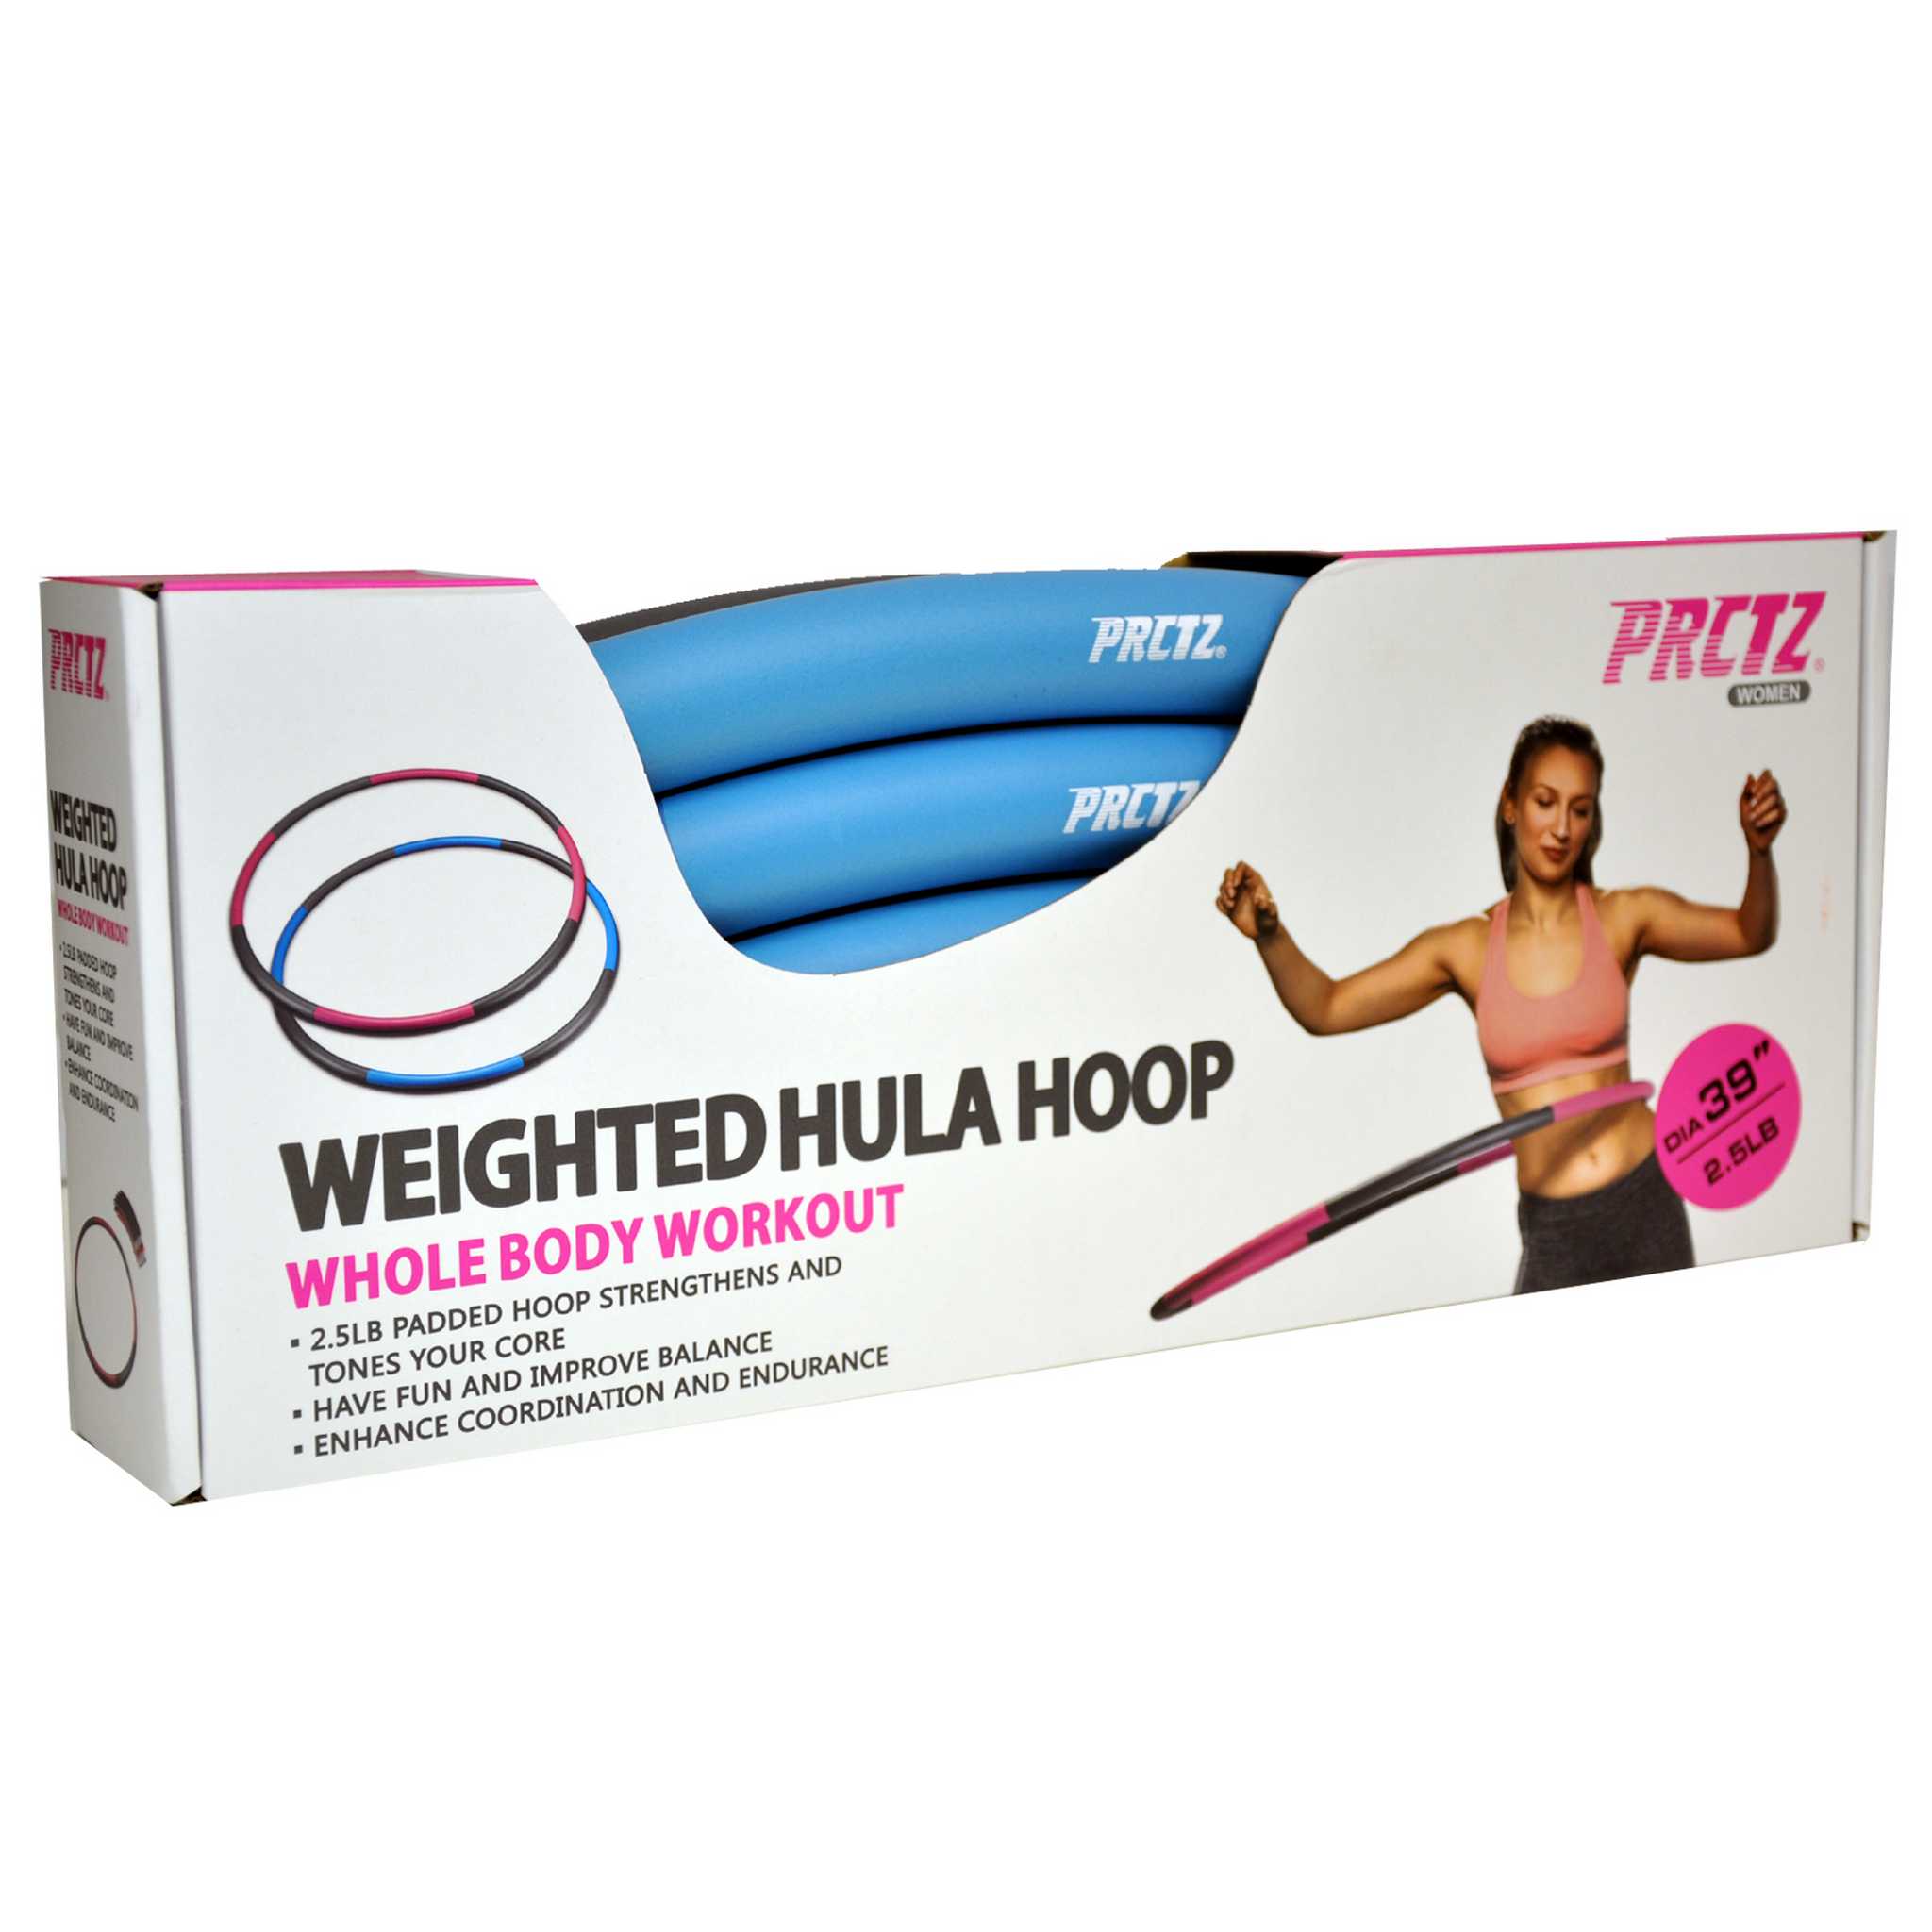 Weighted Hula Hoop, “Quick-Lock” Assembly, 2.5 lbs.